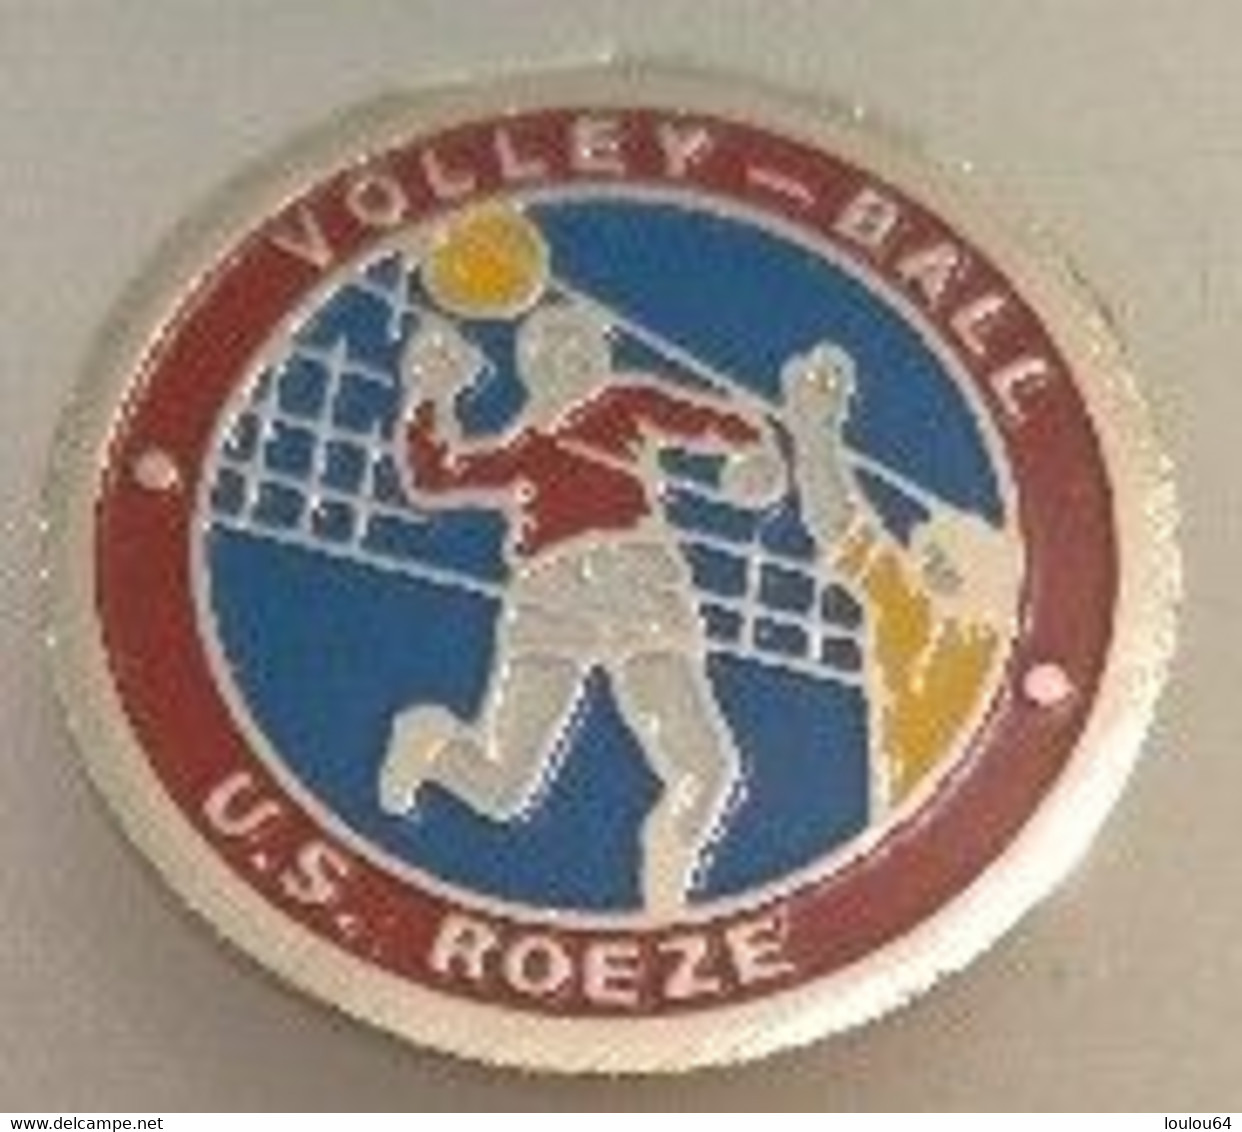 Pin's - Sports - Volleyball - U.S. ROEZE - VOLLEY-BALL - - Volleybal